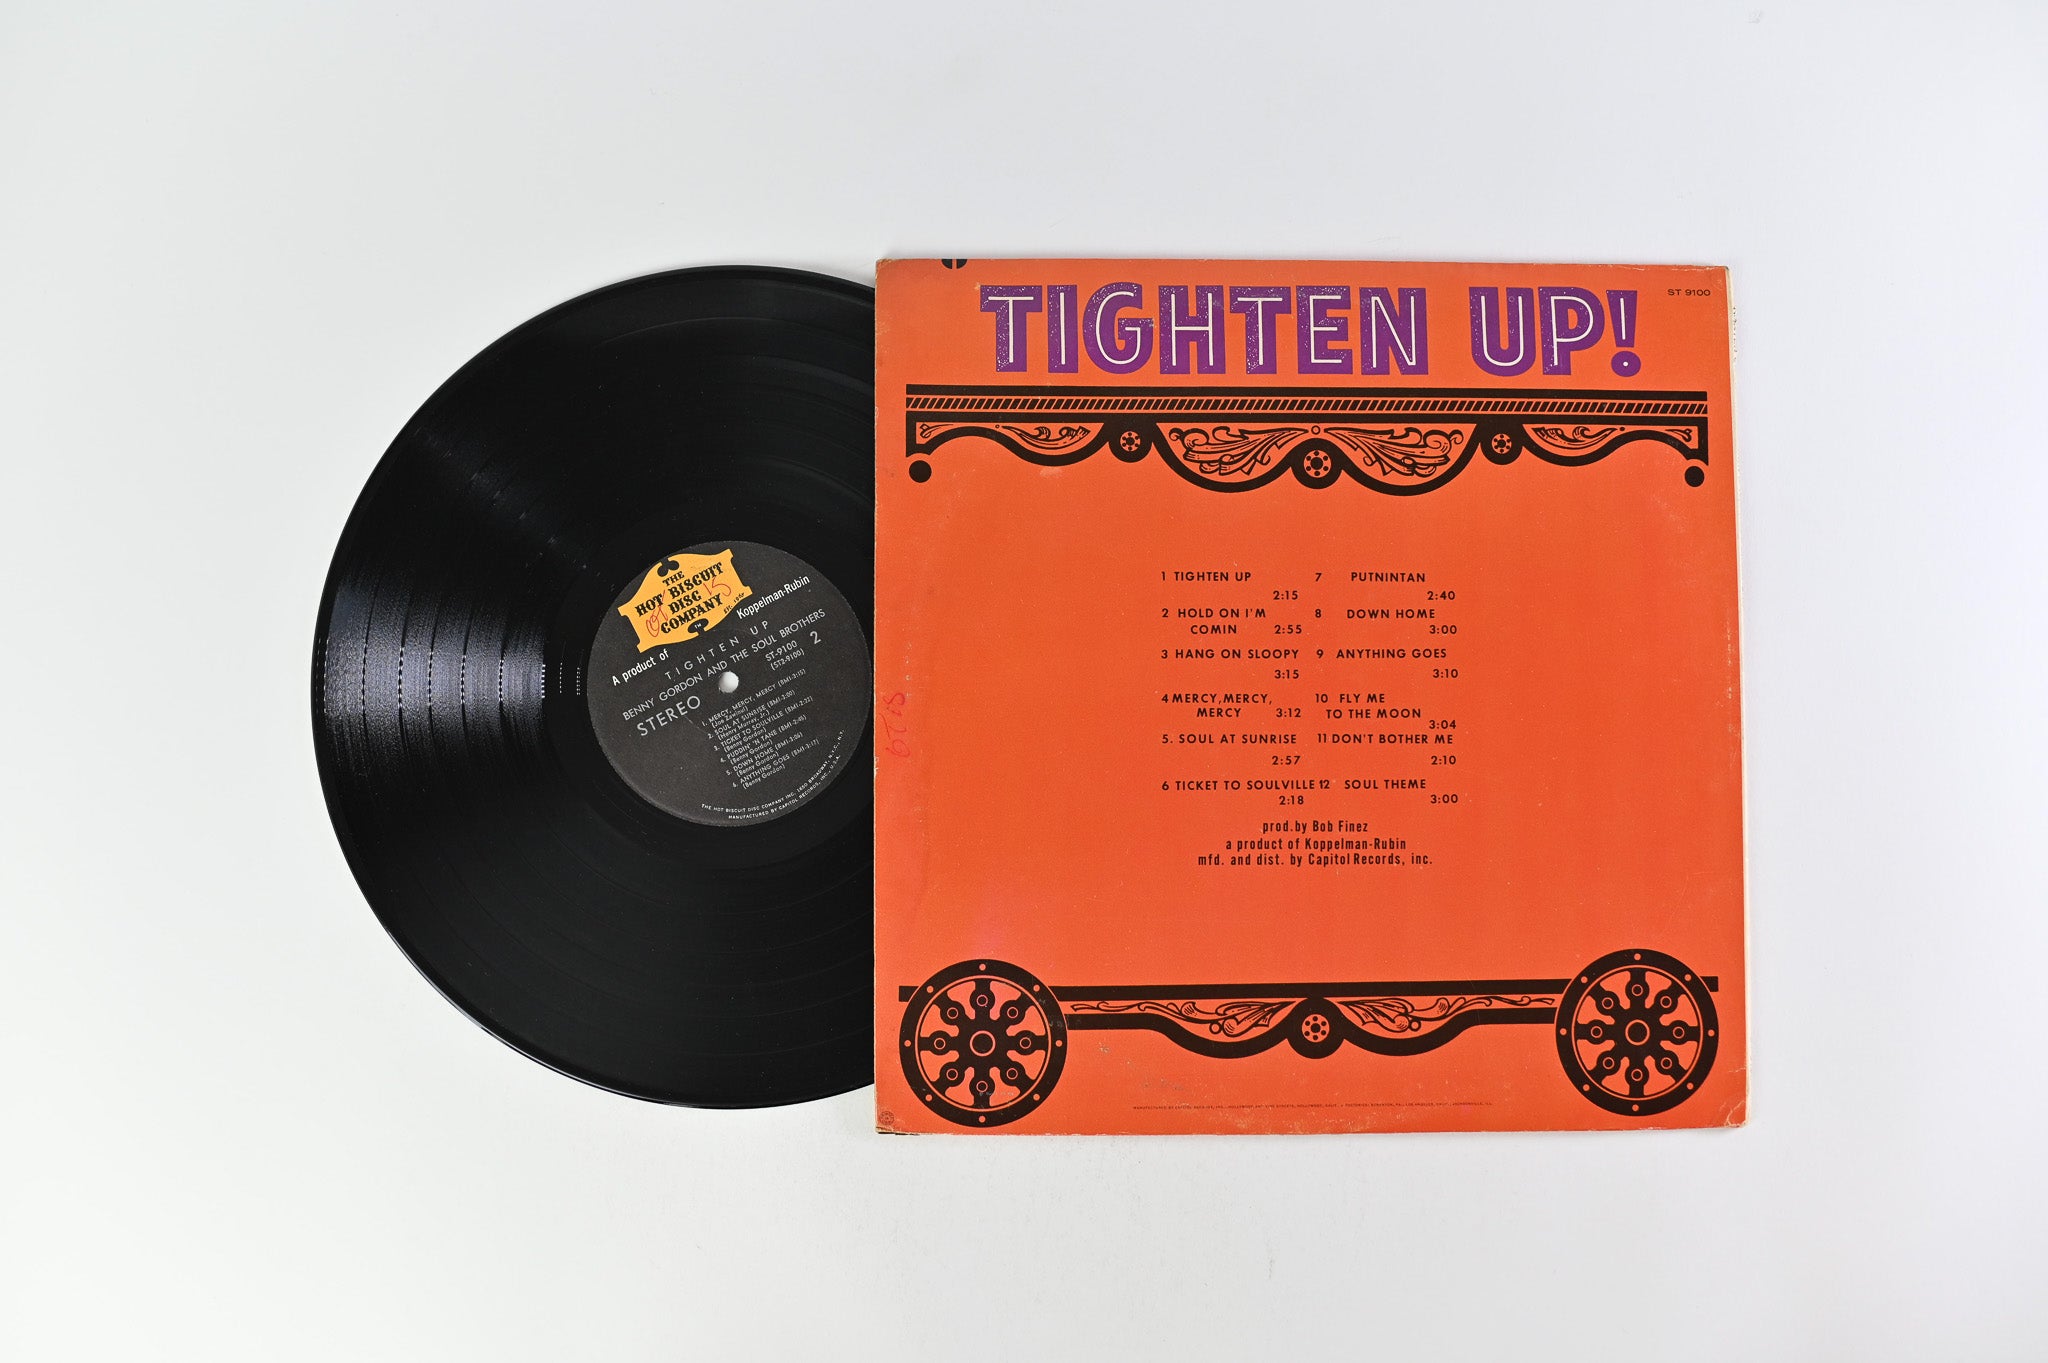 Benny Gordon & The Soul Brothers - Tighten Up on The Hot Biscuit Disc Company